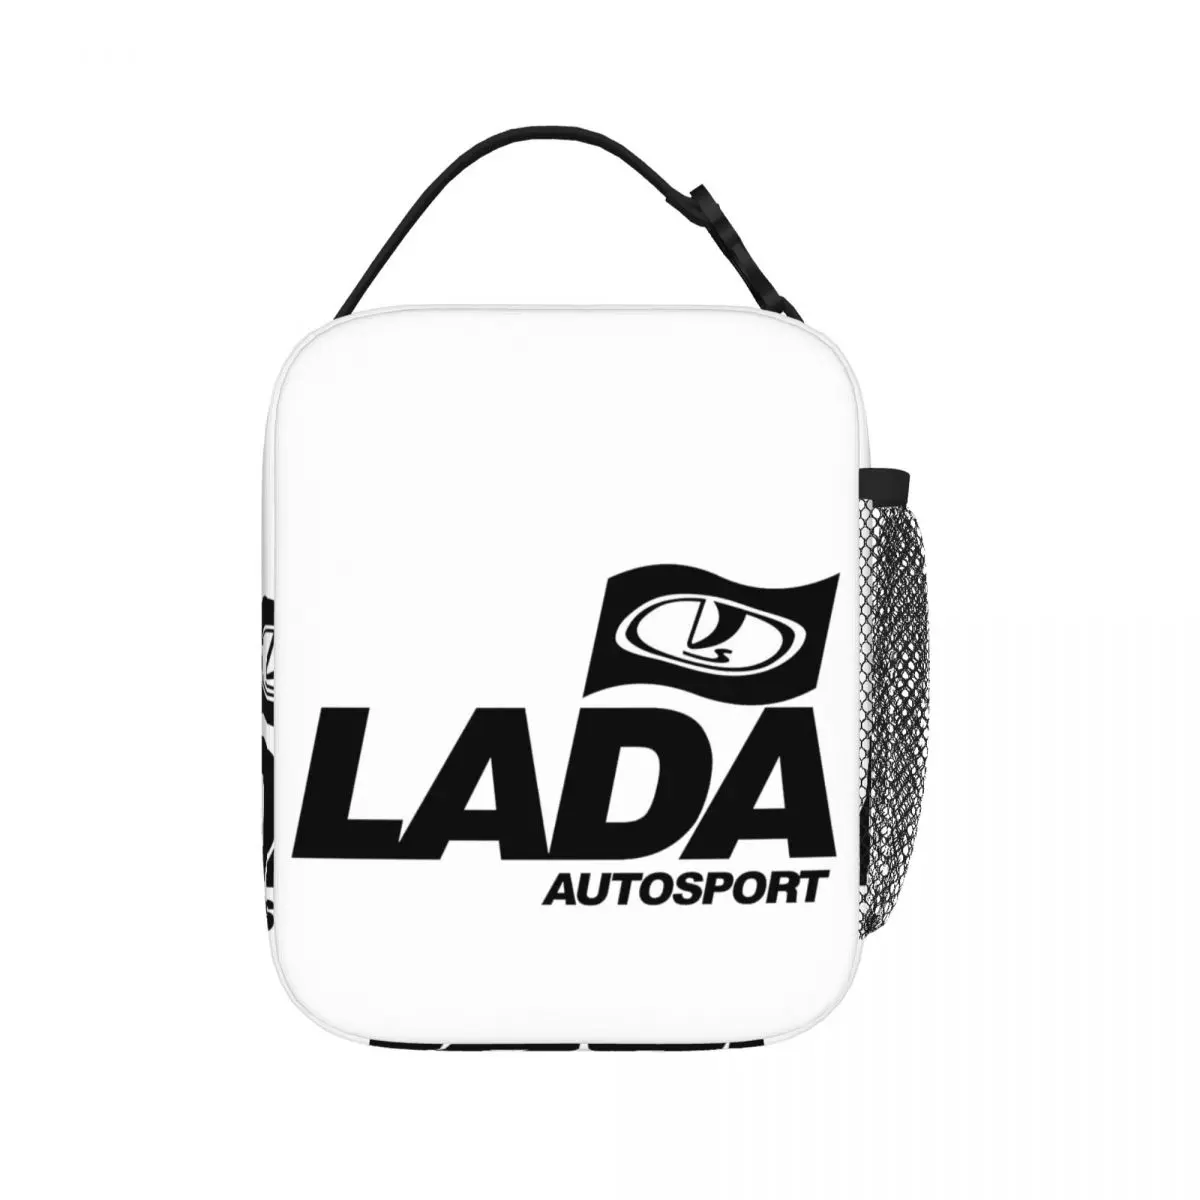 

Lada Autosport With Flag Logo (black) Insulated Lunch Bags Resuable Picnic Bag Thermal Lunch Tote for Woman Work Children School